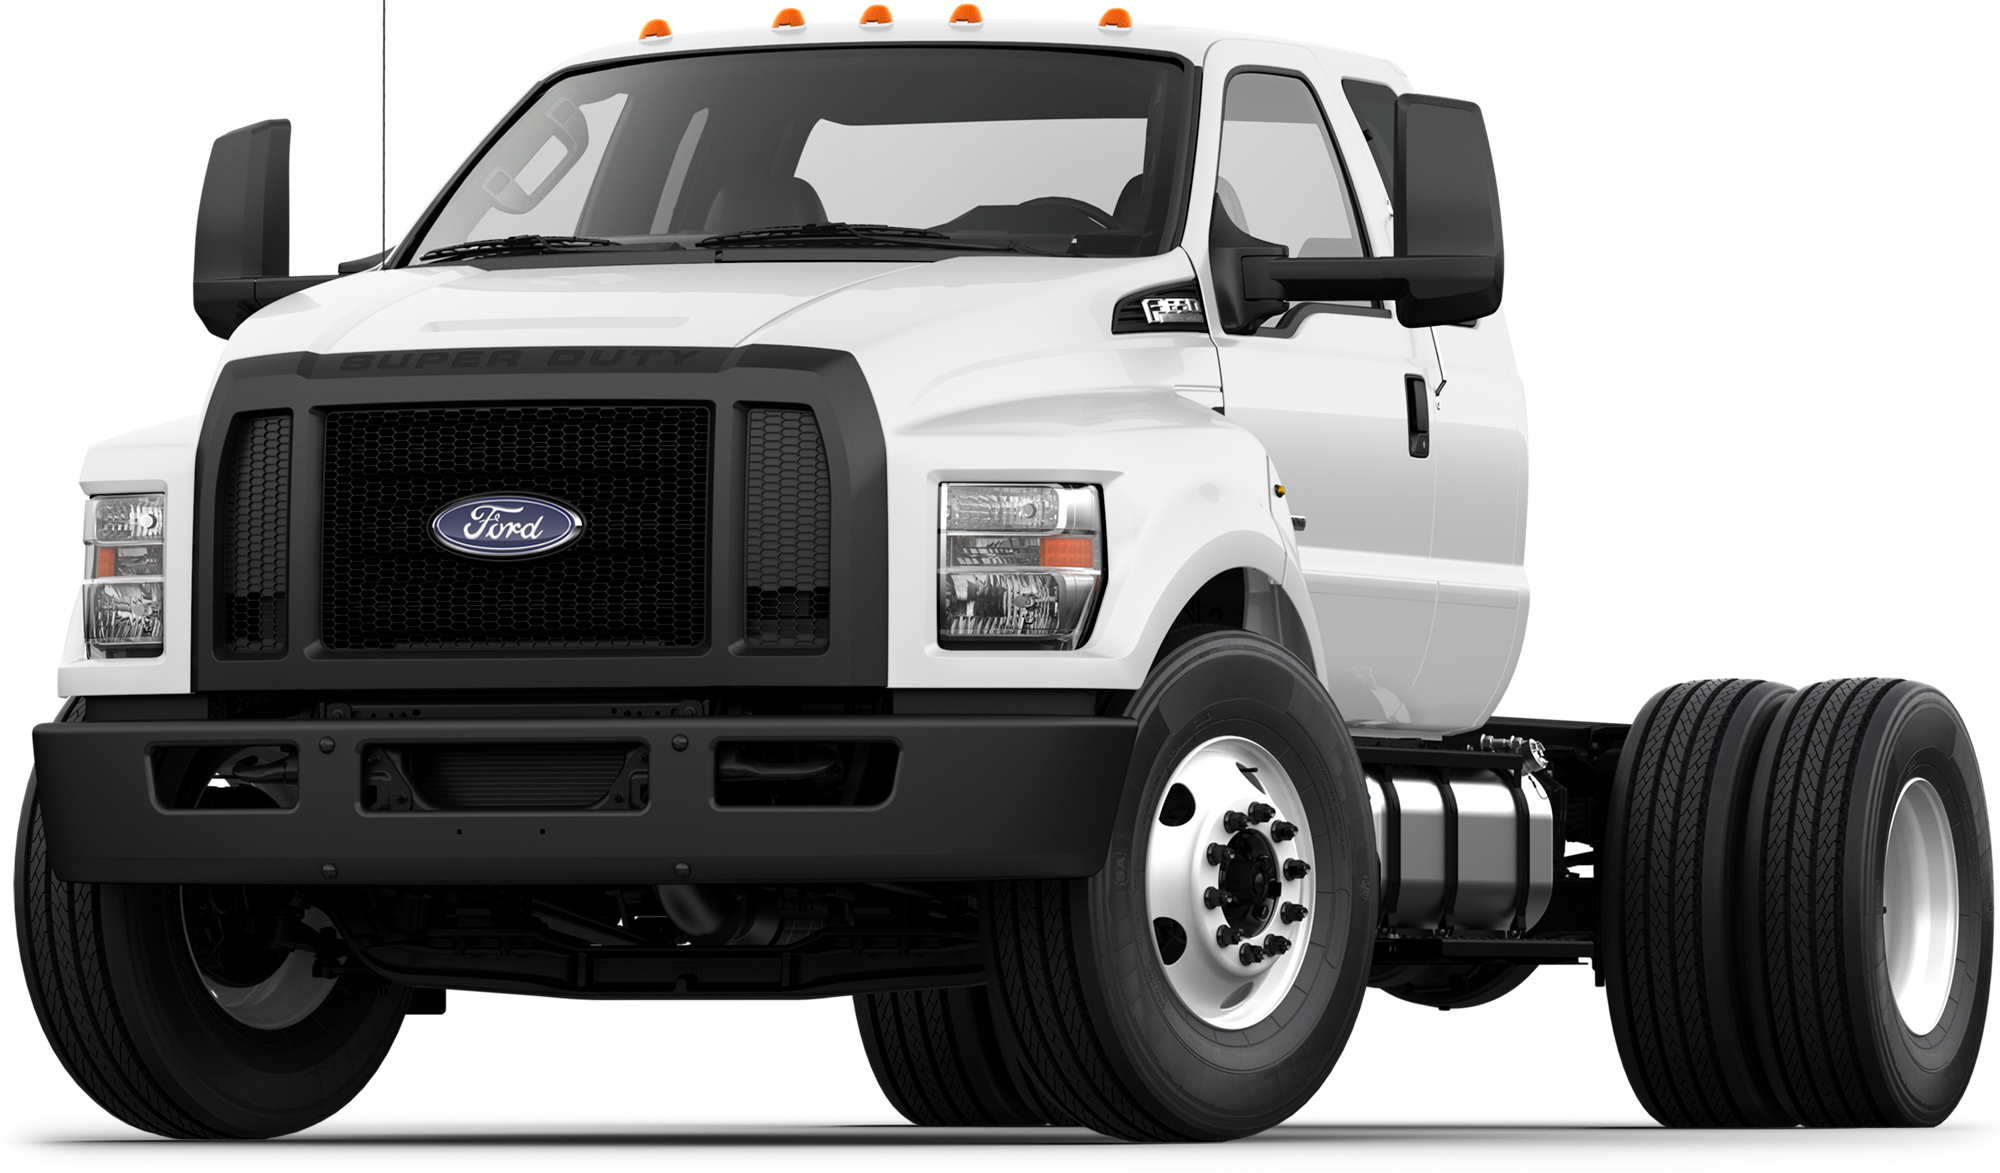 2022 Ford F750 Diesel Incentives, Specials & Offers in Whitesboro TX